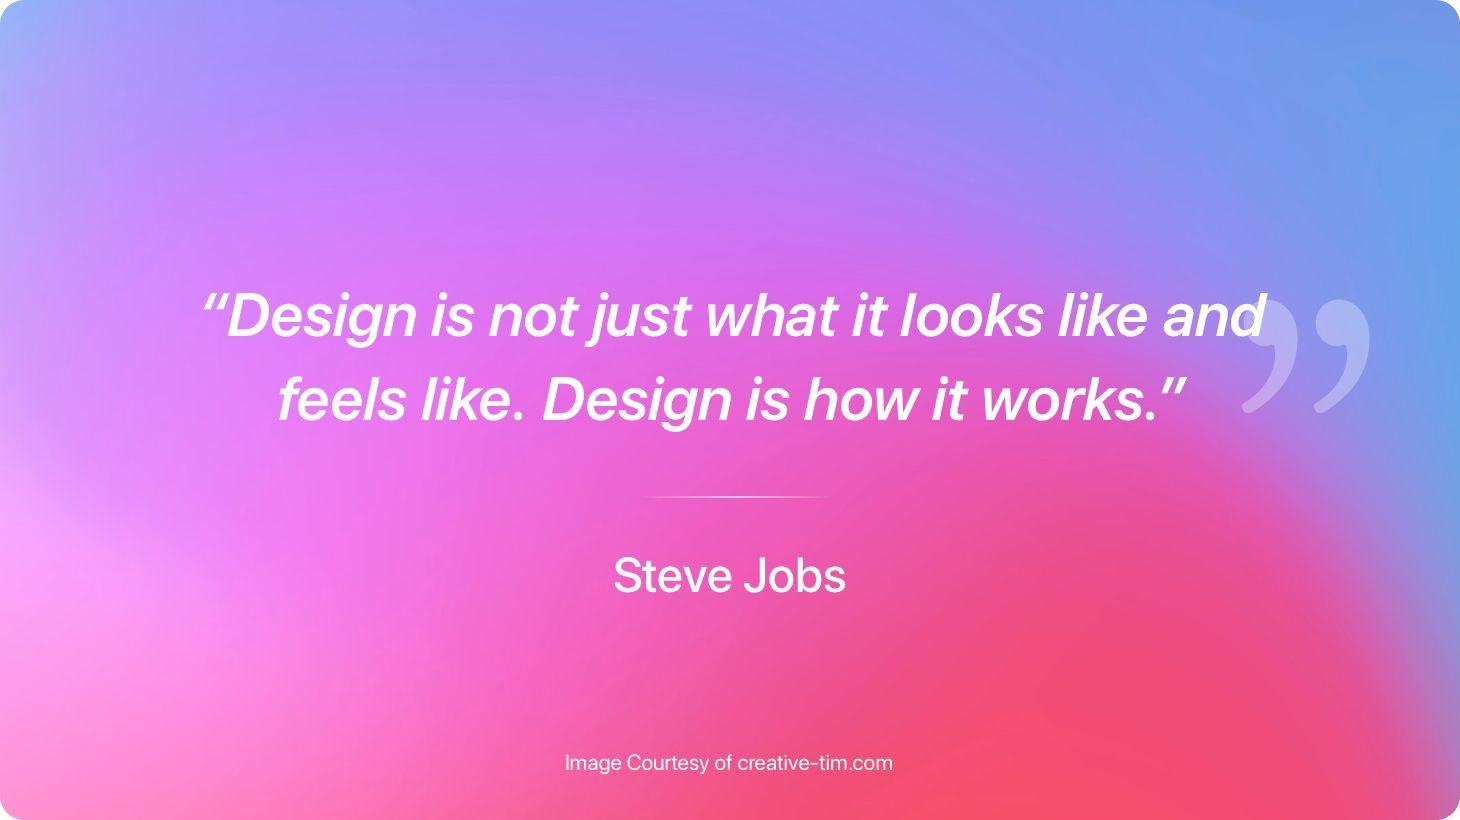 A quote from Steve Jobs that reads, "Design is not just what it looks like and feels like. Design is how it works."